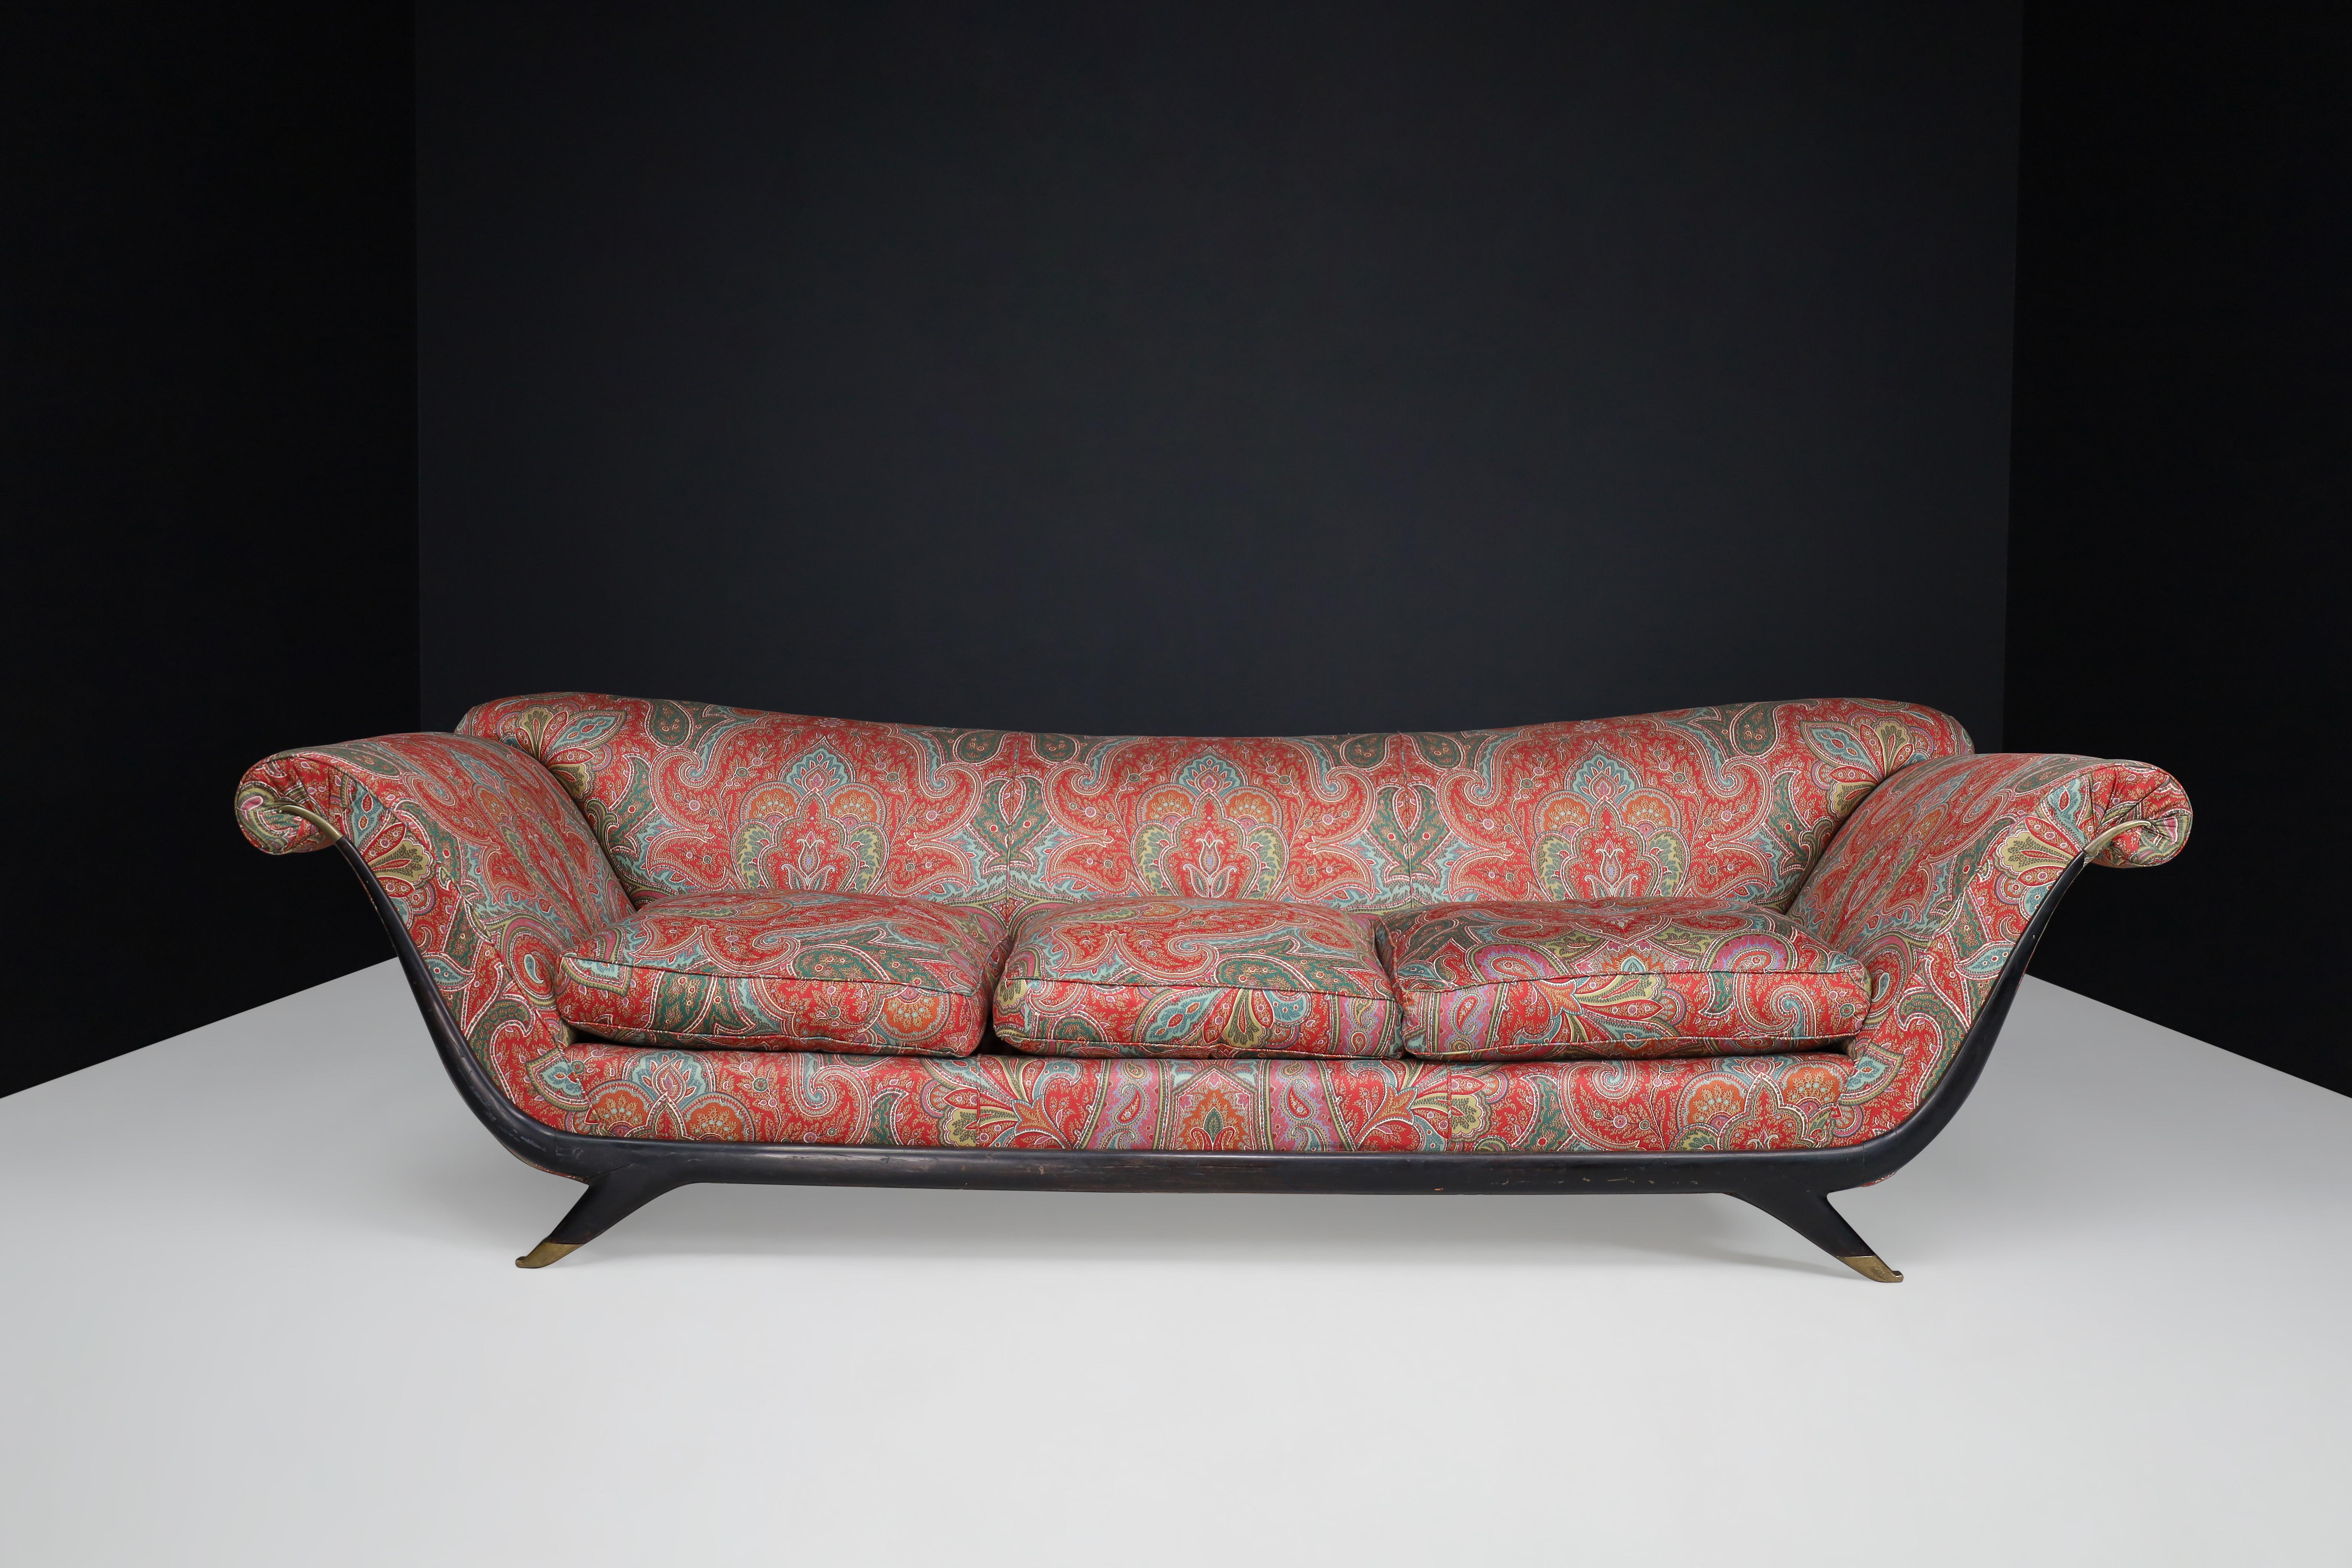 Guglielmo Ulrich sofa in Walnut, Fabric Upholstery, and Brass, Italy 1930s 

The renowned architect Guglielmo Ulrich designed a sofa in Italian classicism, a Production of the 1930s. This sofa is an exceptional example of Ulrich's architectural